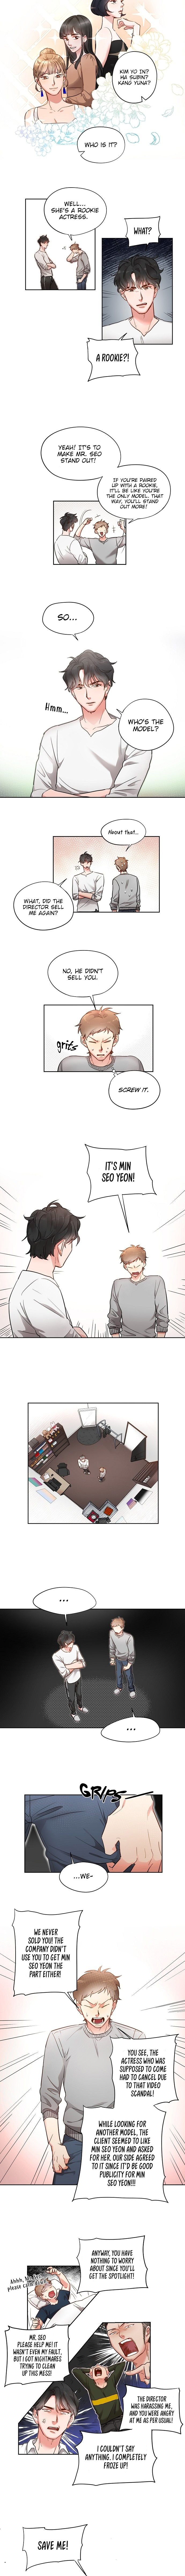 Liking you Excitedly Chapter 2 - Page 3